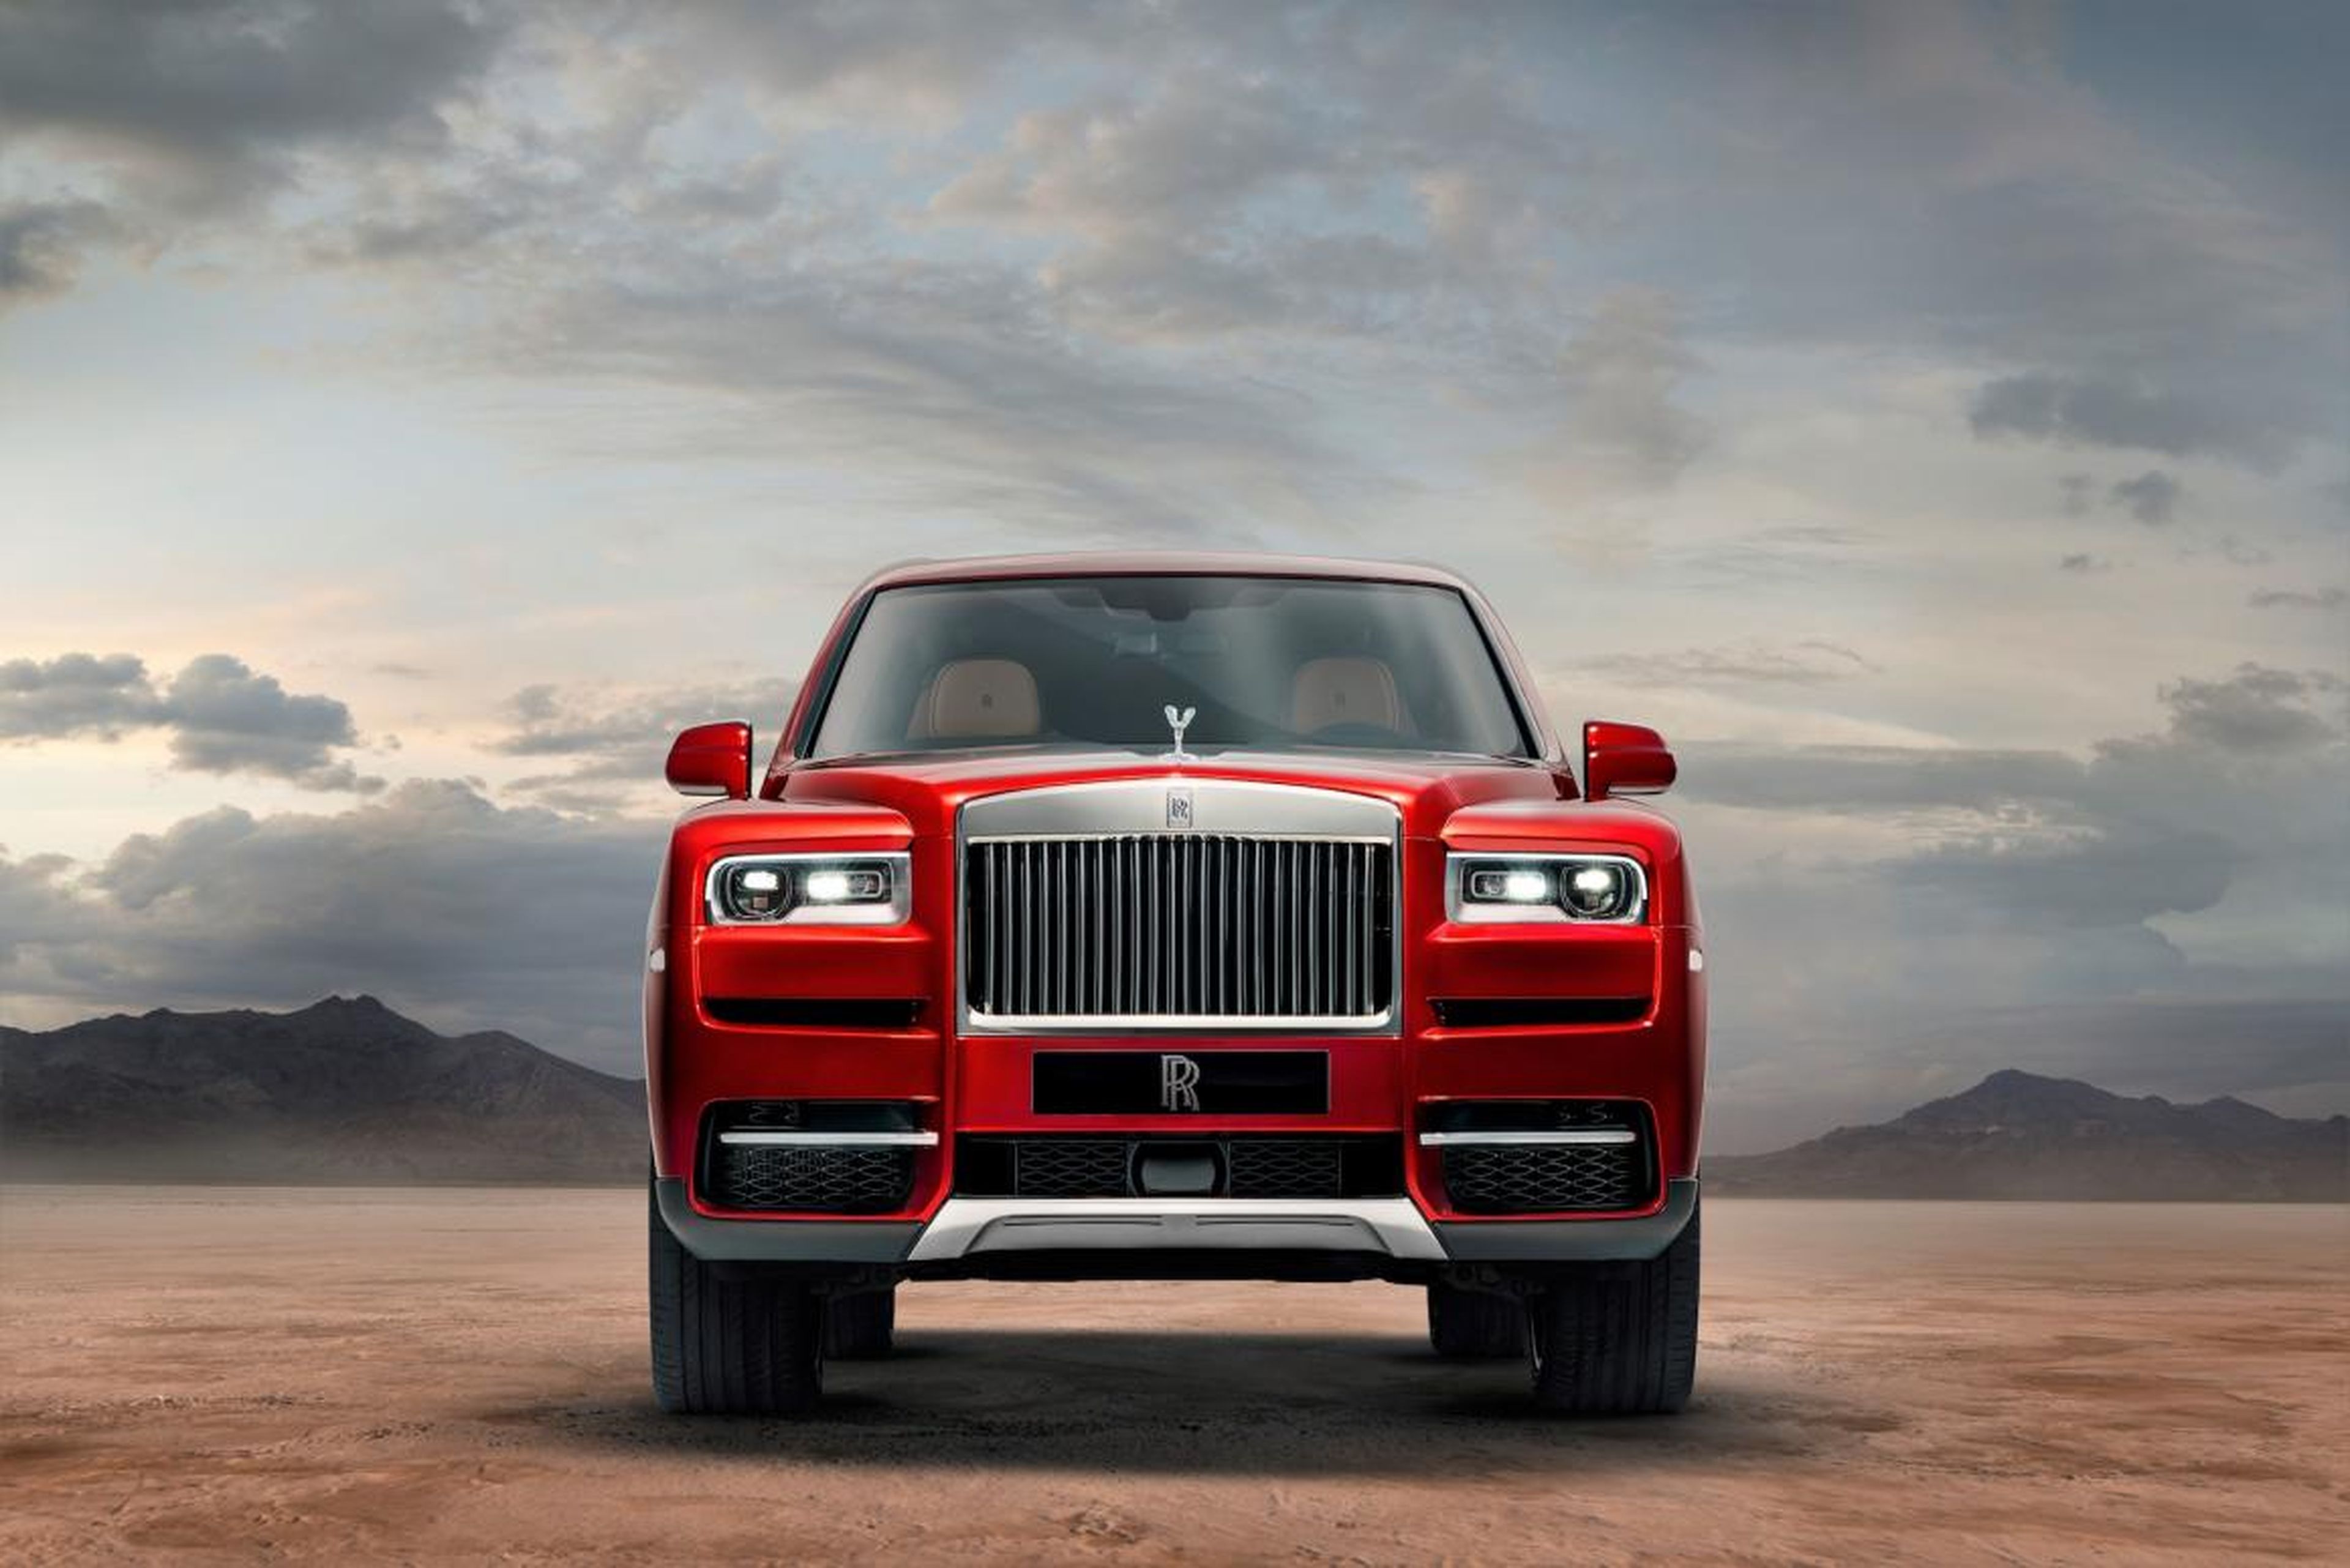 Styling-wise, the Cullinan is unmistakably a Rolls-Royce with the company's vertical grille dominating the SUV's front fascia.